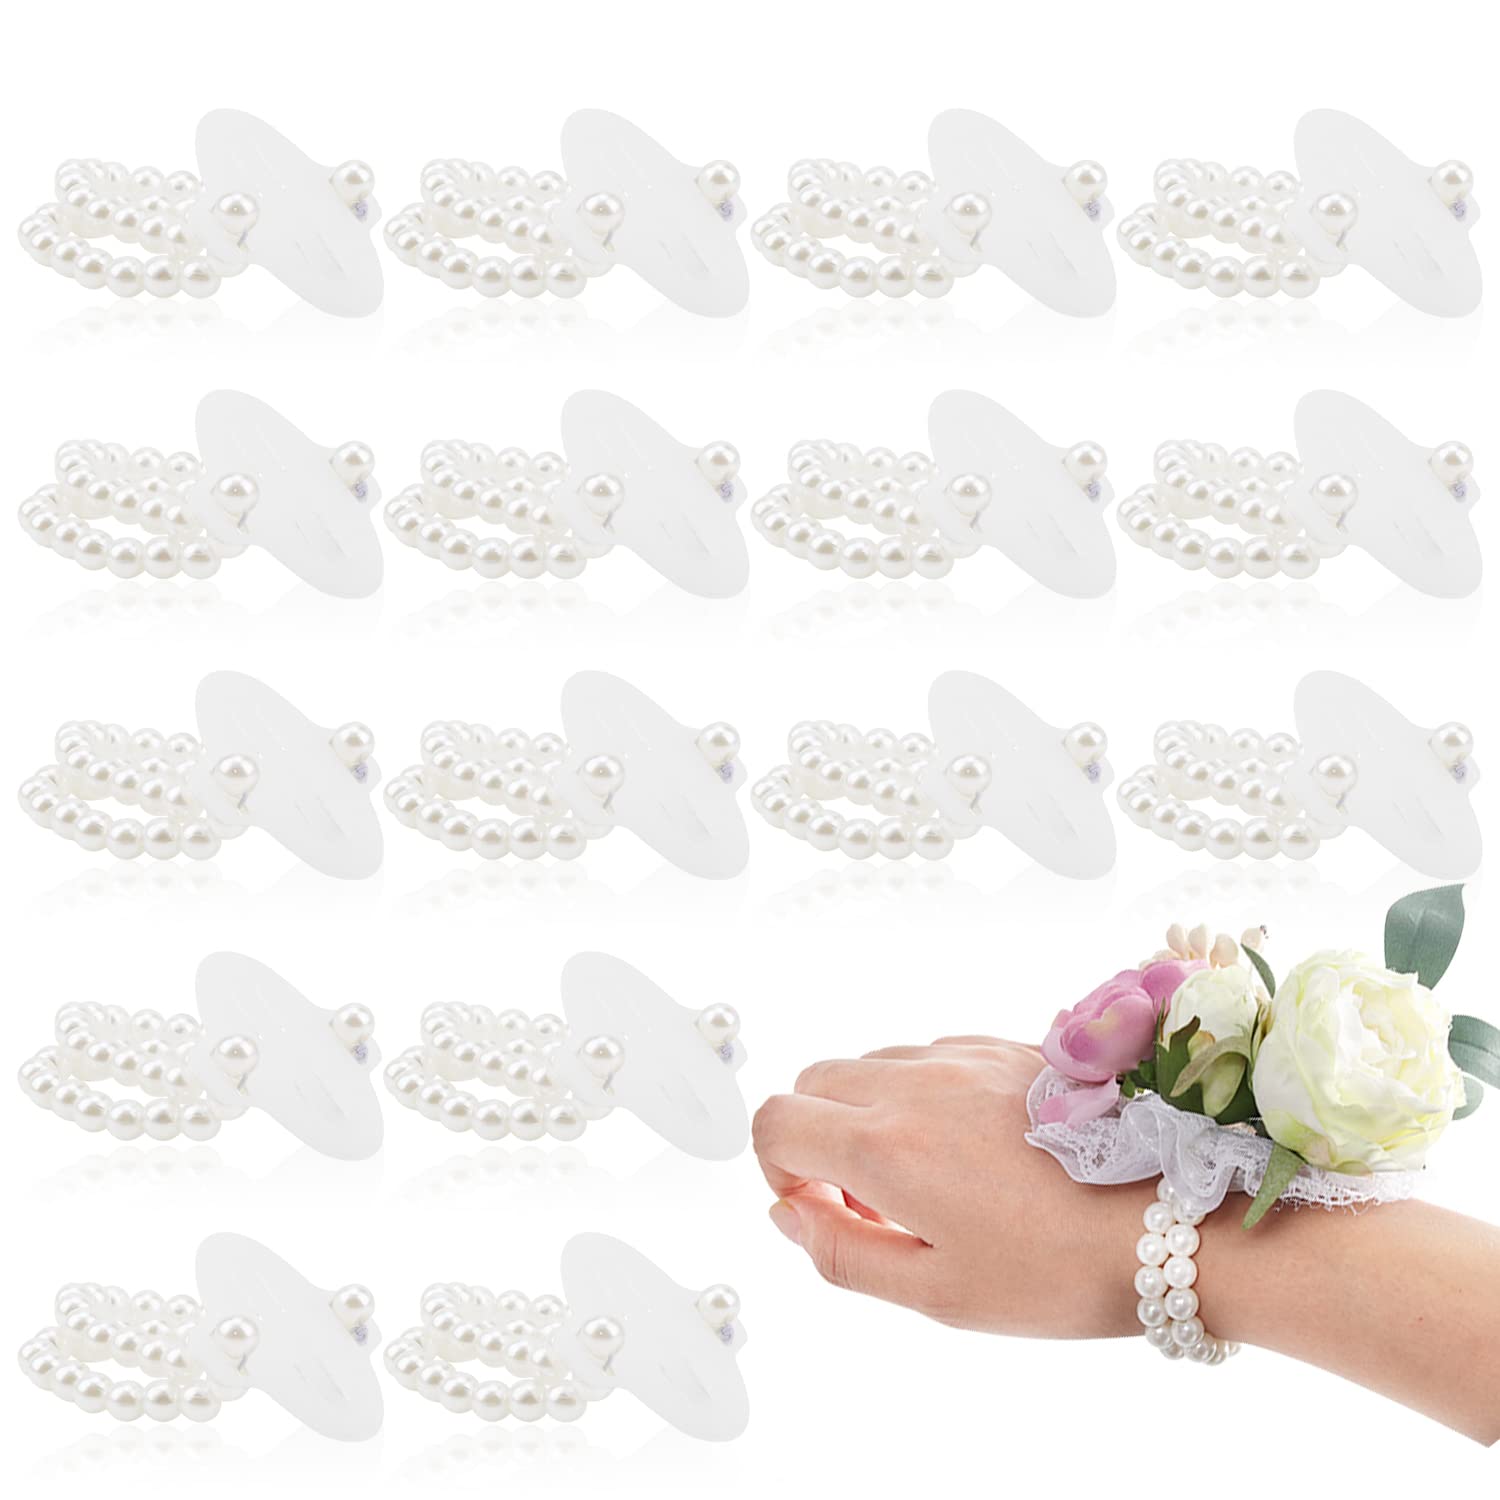  HIONXMGA Corsage Wristlet Band 10PCS Elastic Pearl Wrist  Corsage Bracelets Bands, Wristlets Stretch Pearl Wedding Wristband for  Wedding Party Prom Wrist DIY Handmade Corsage Supplies : Arts, Crafts &  Sewing